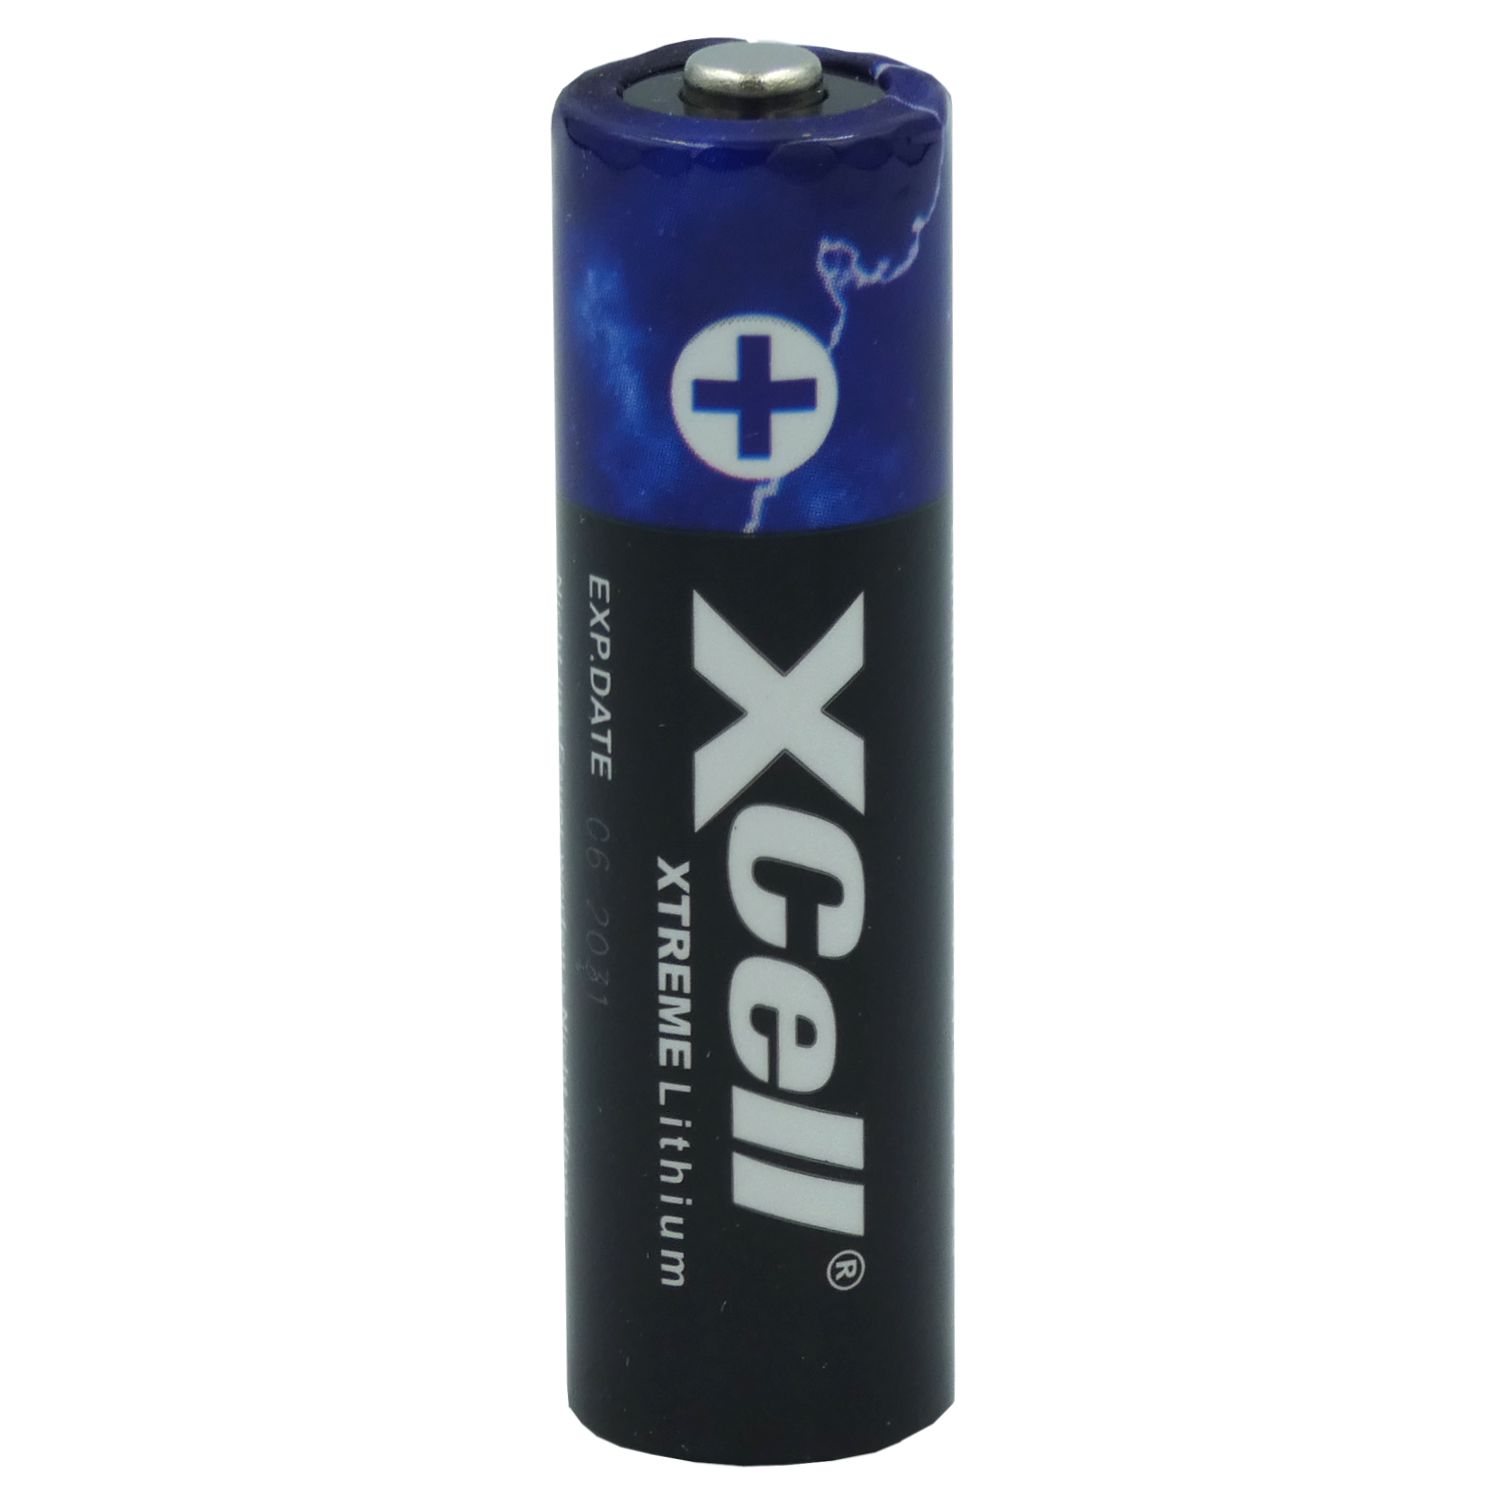 Test: Xcell L91 Lithium Extreme AA Mignon FR6 Batterie Modell 2023